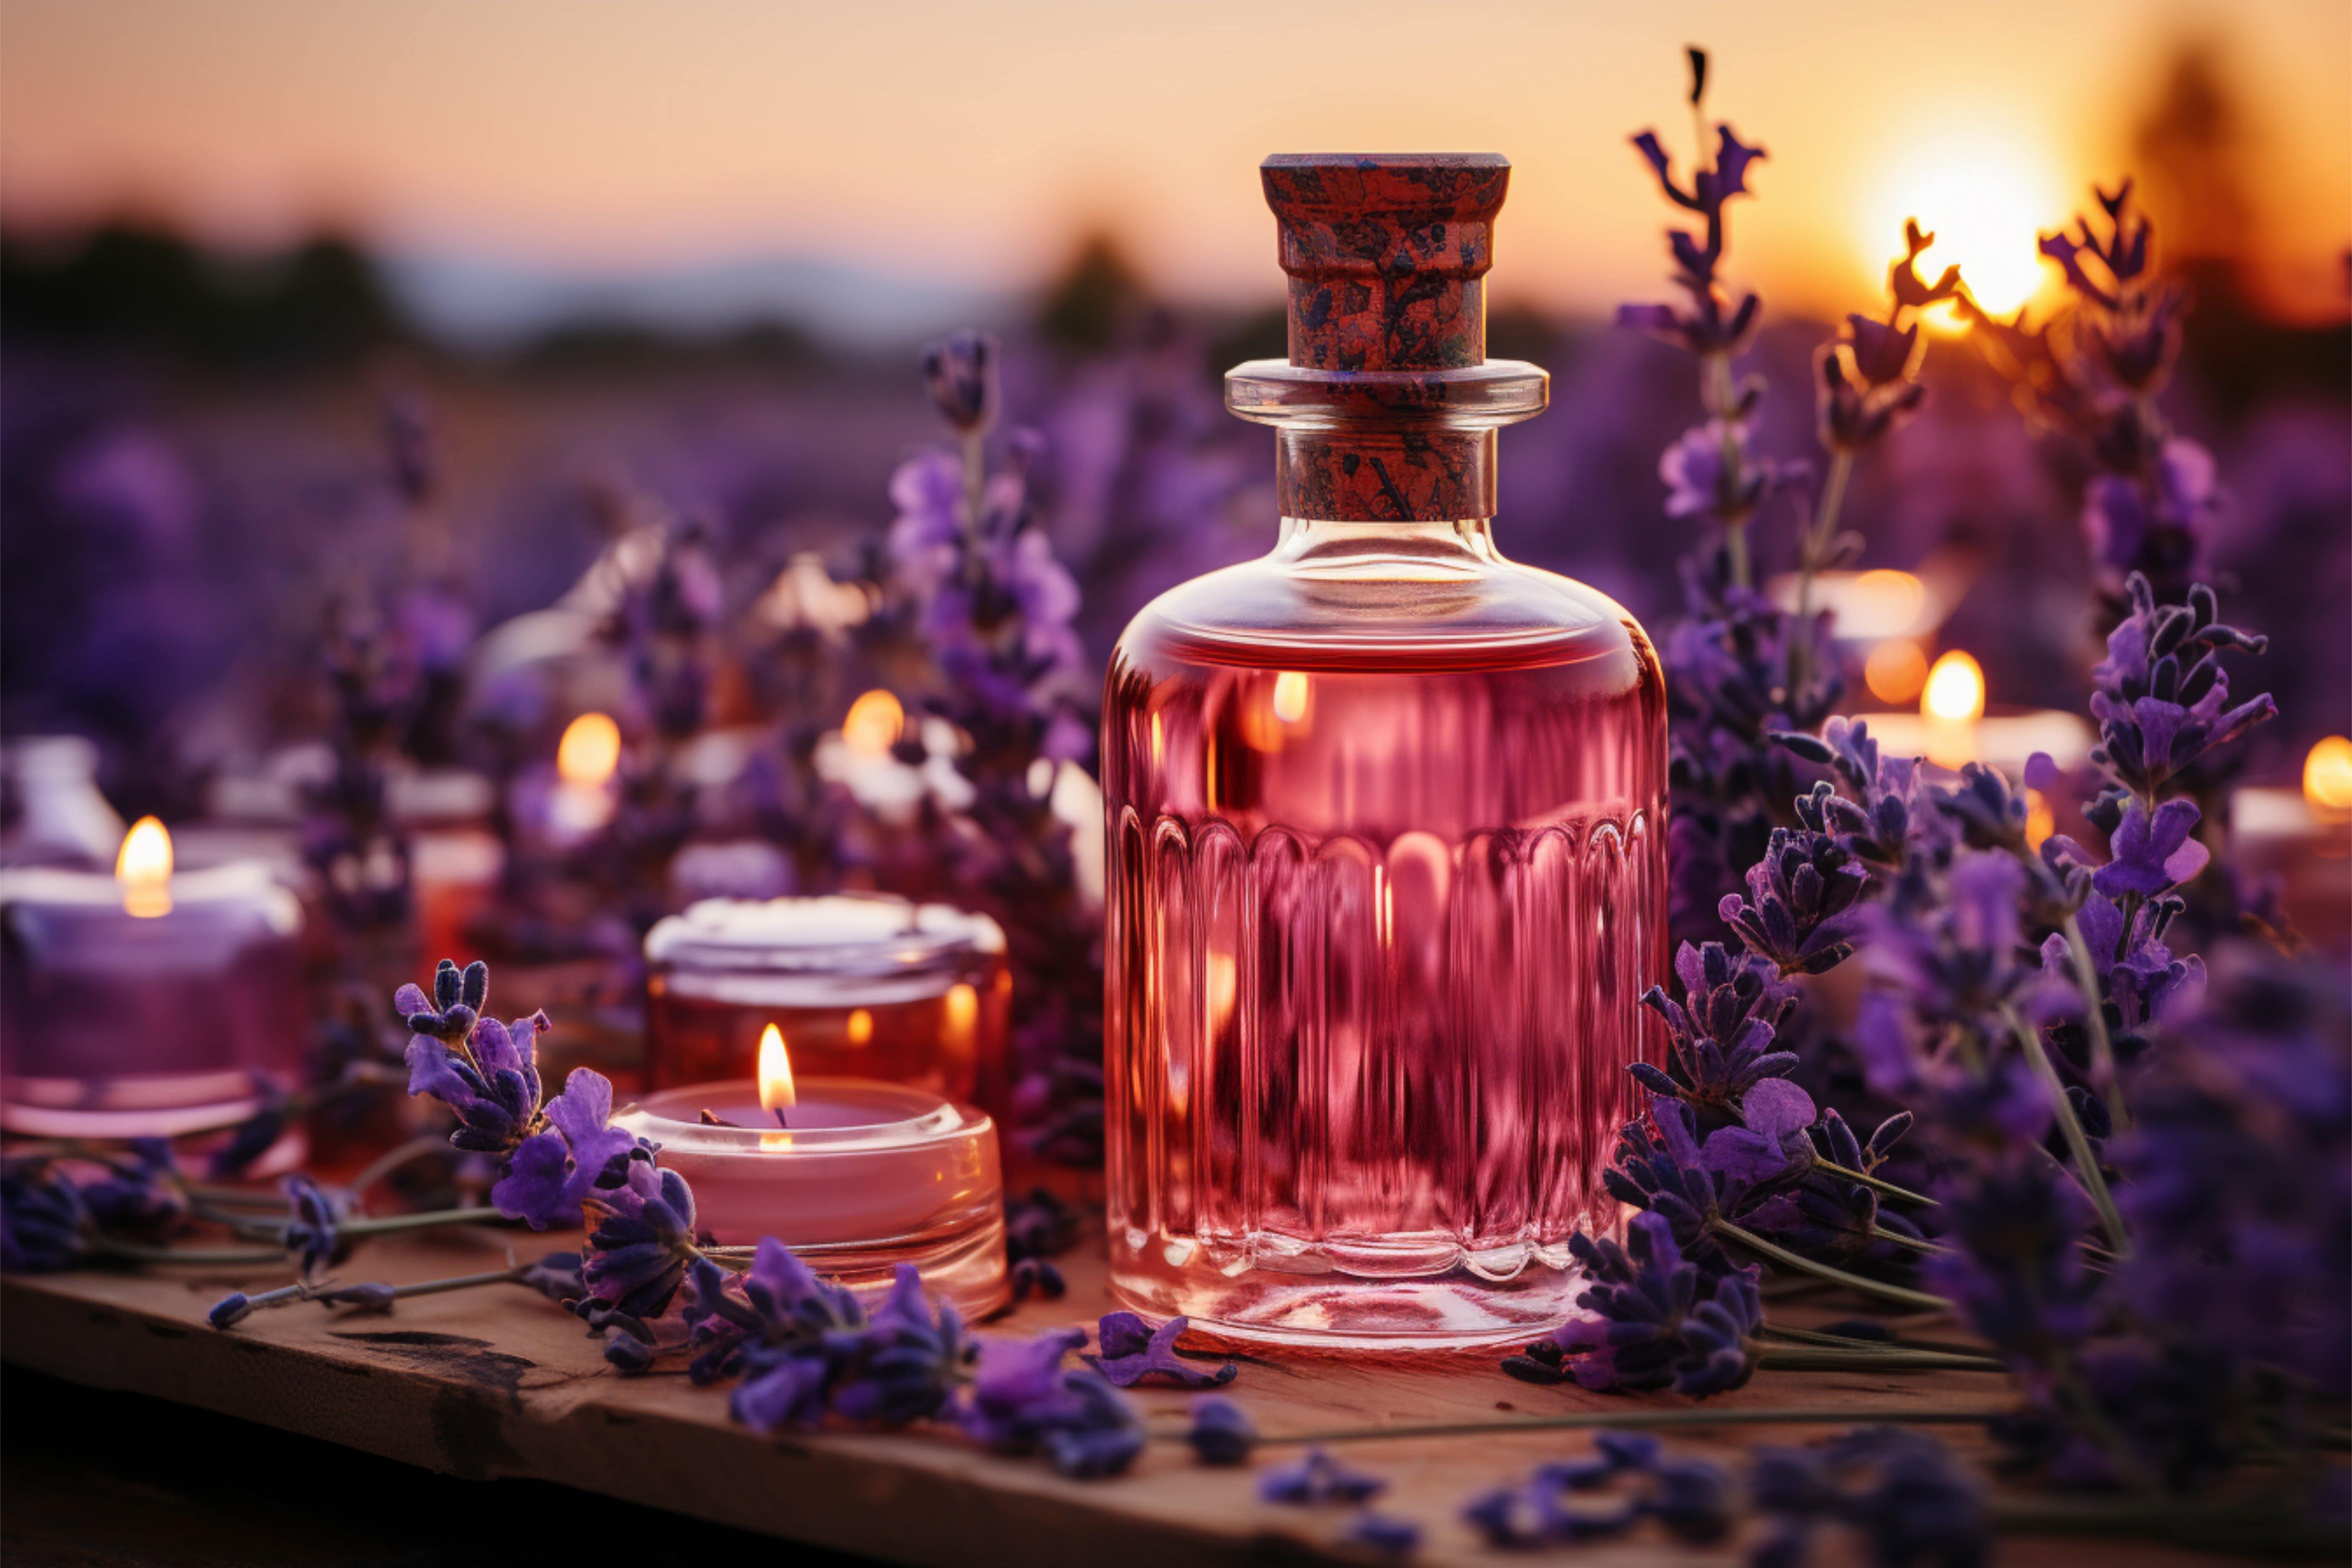 A lavender aromatherapy set by candlelight at sunset surrounded by fresh lavender flowers